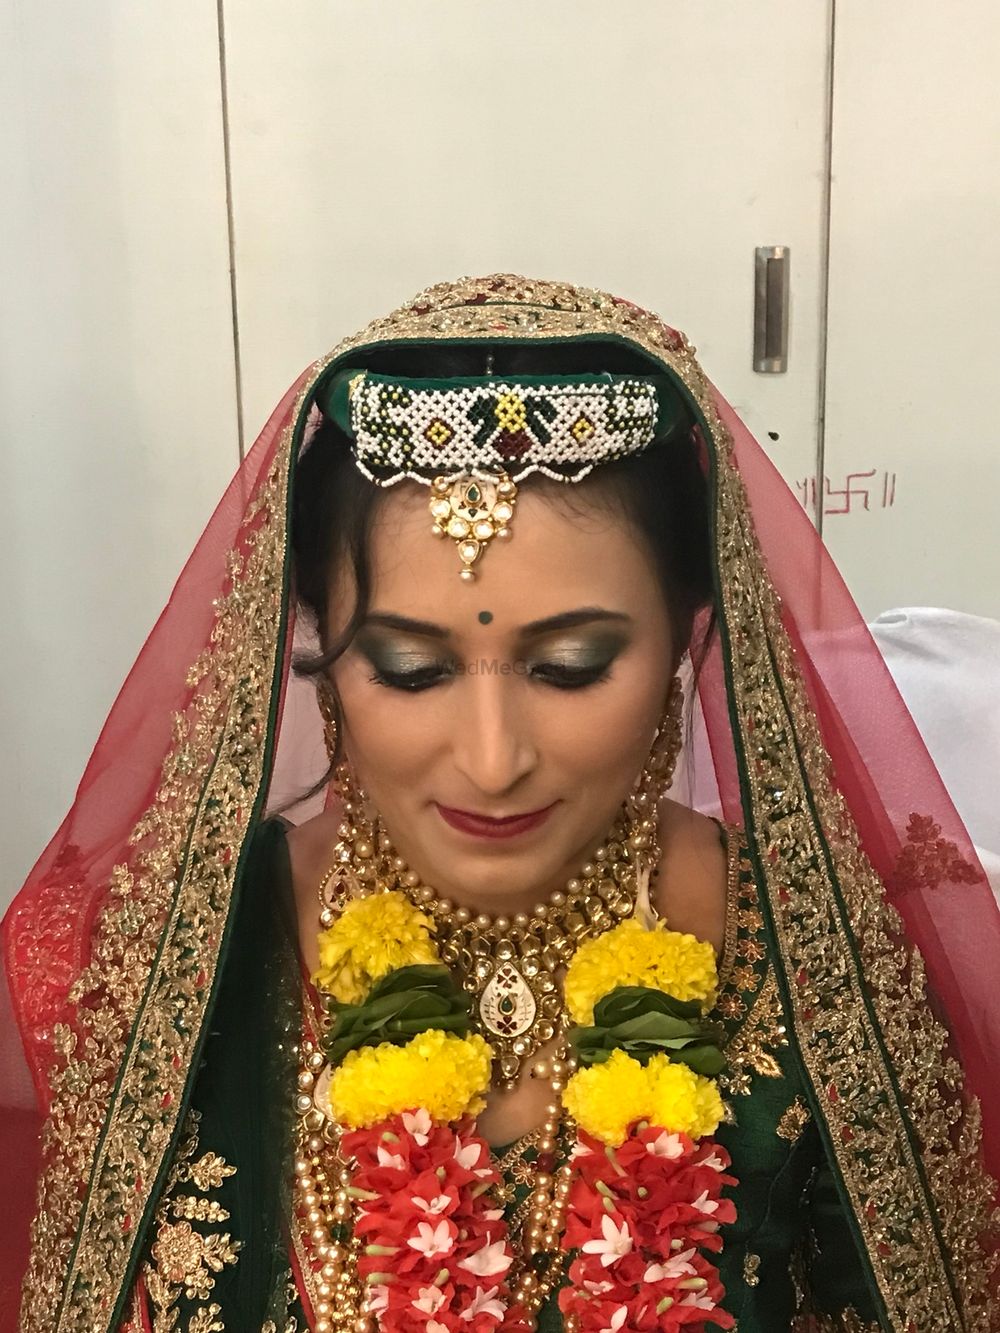 Photo By Makeovers by Mukta  - Bridal Makeup